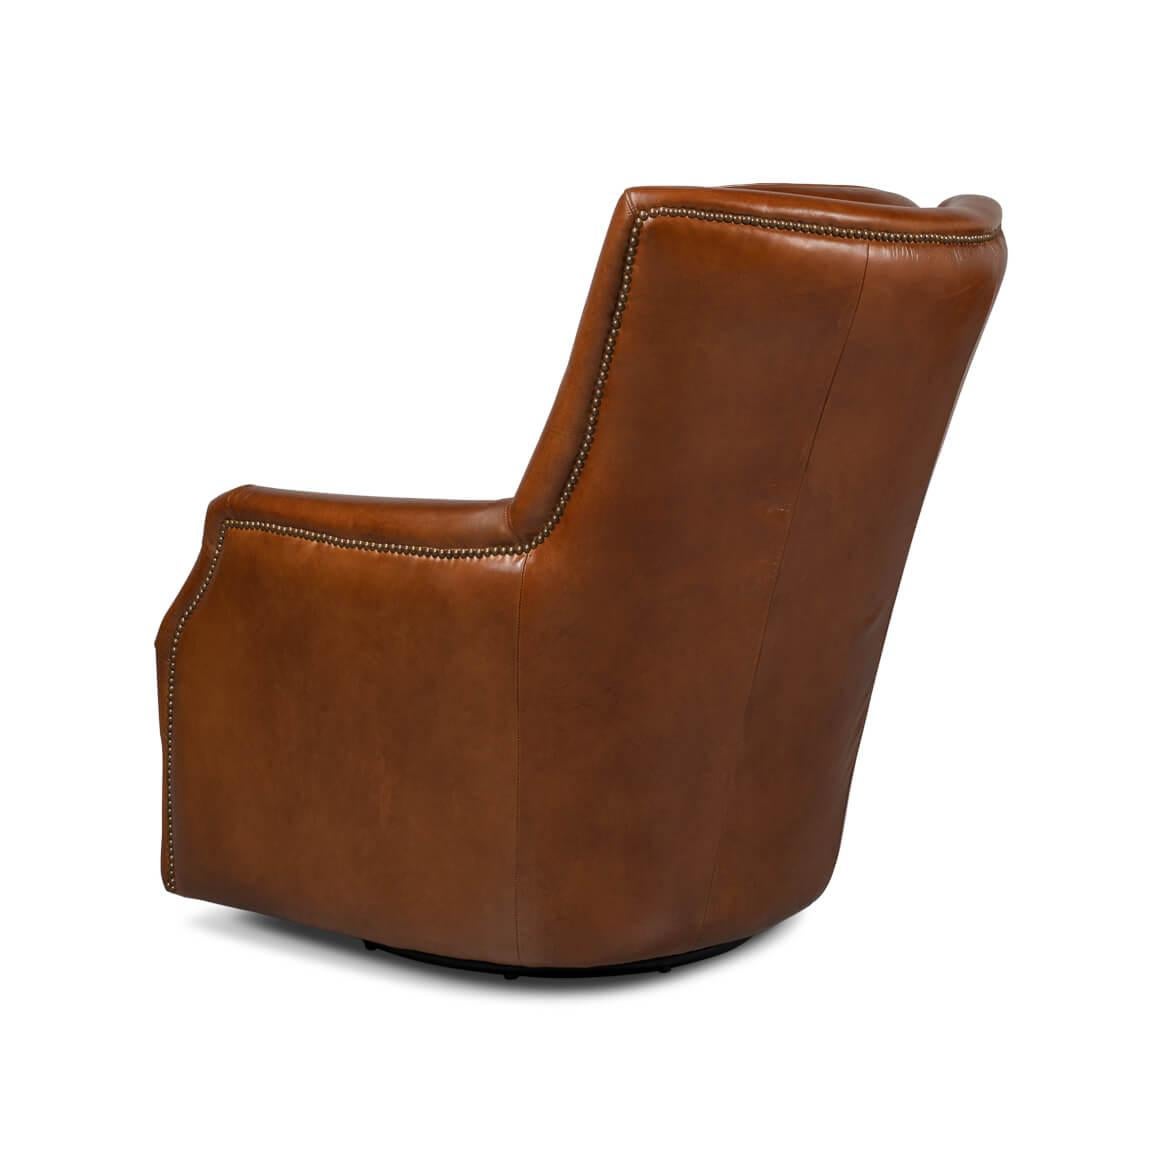 Asian Traditional Leather Swivel Chair For Sale